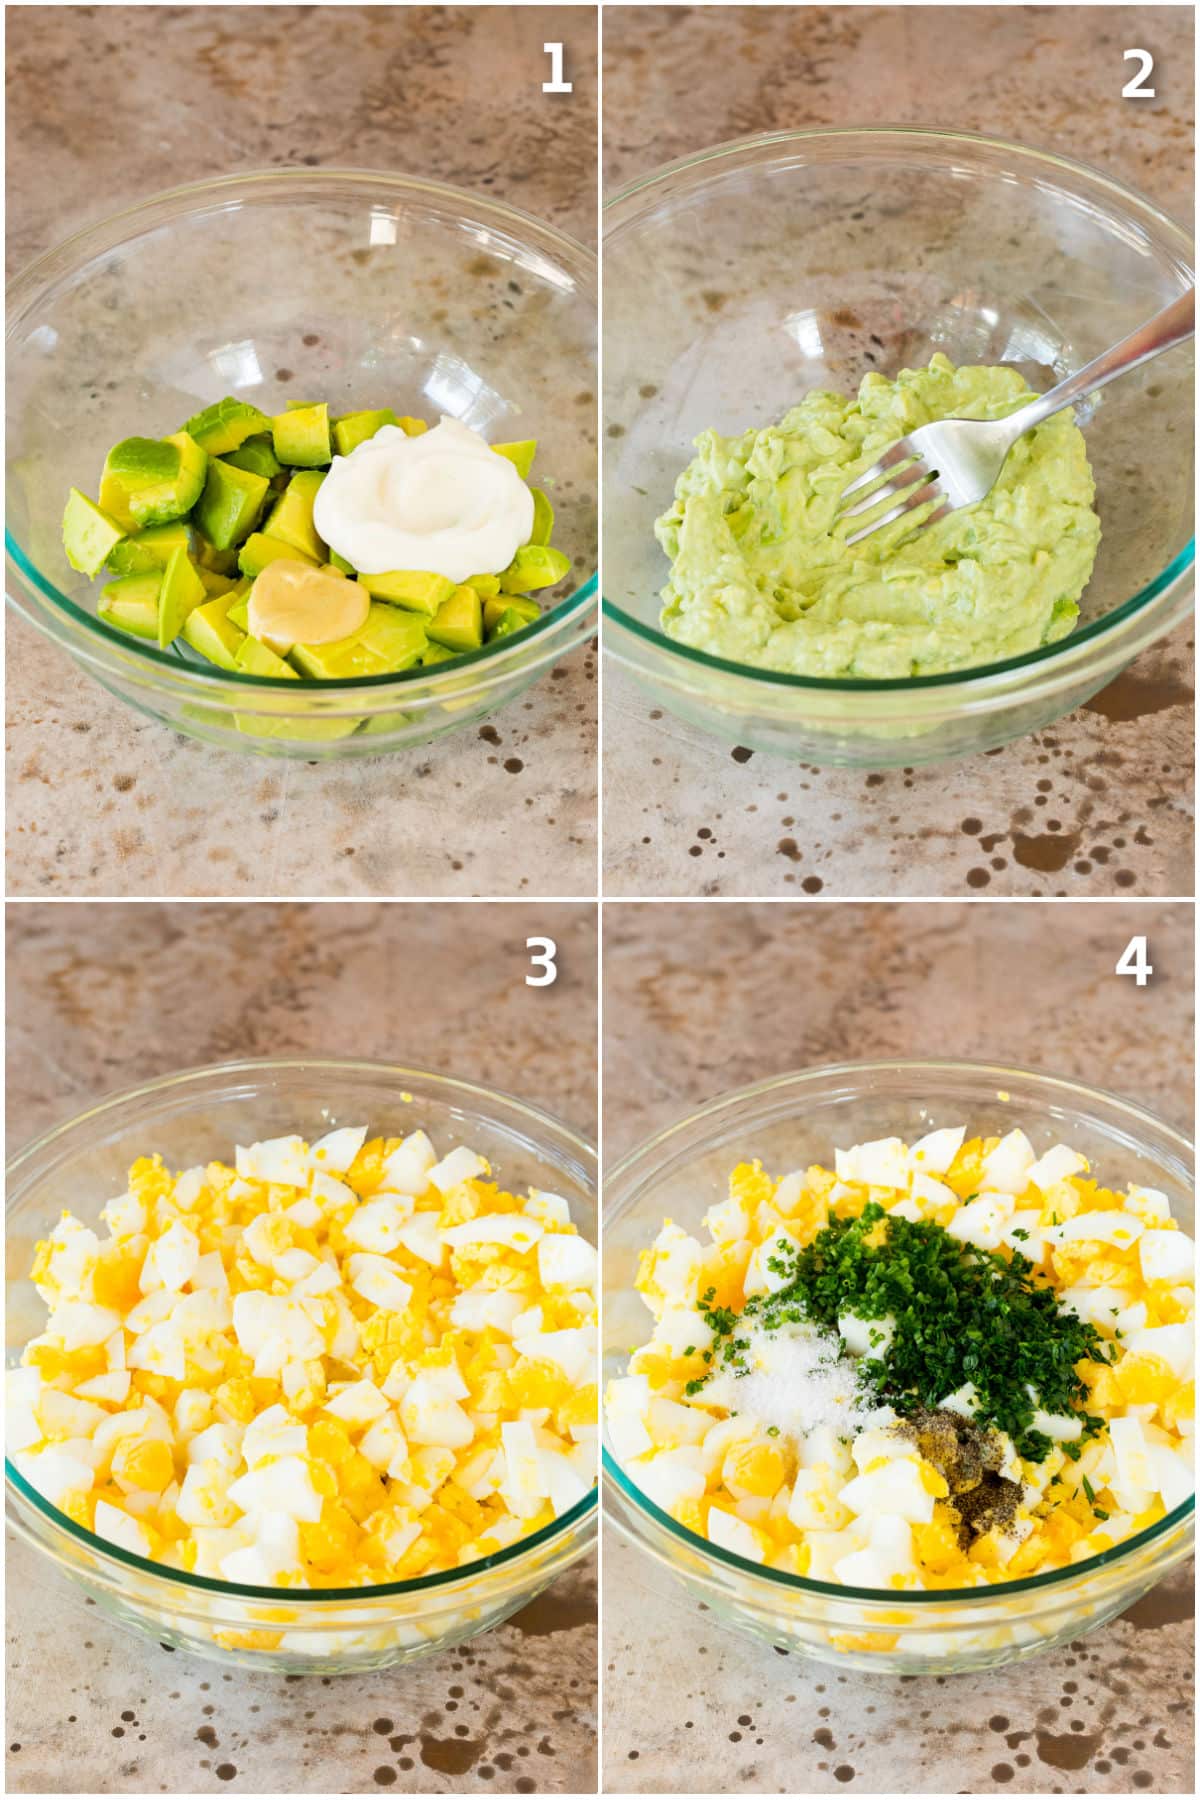 Step by step process shots showing how to make egg salad.